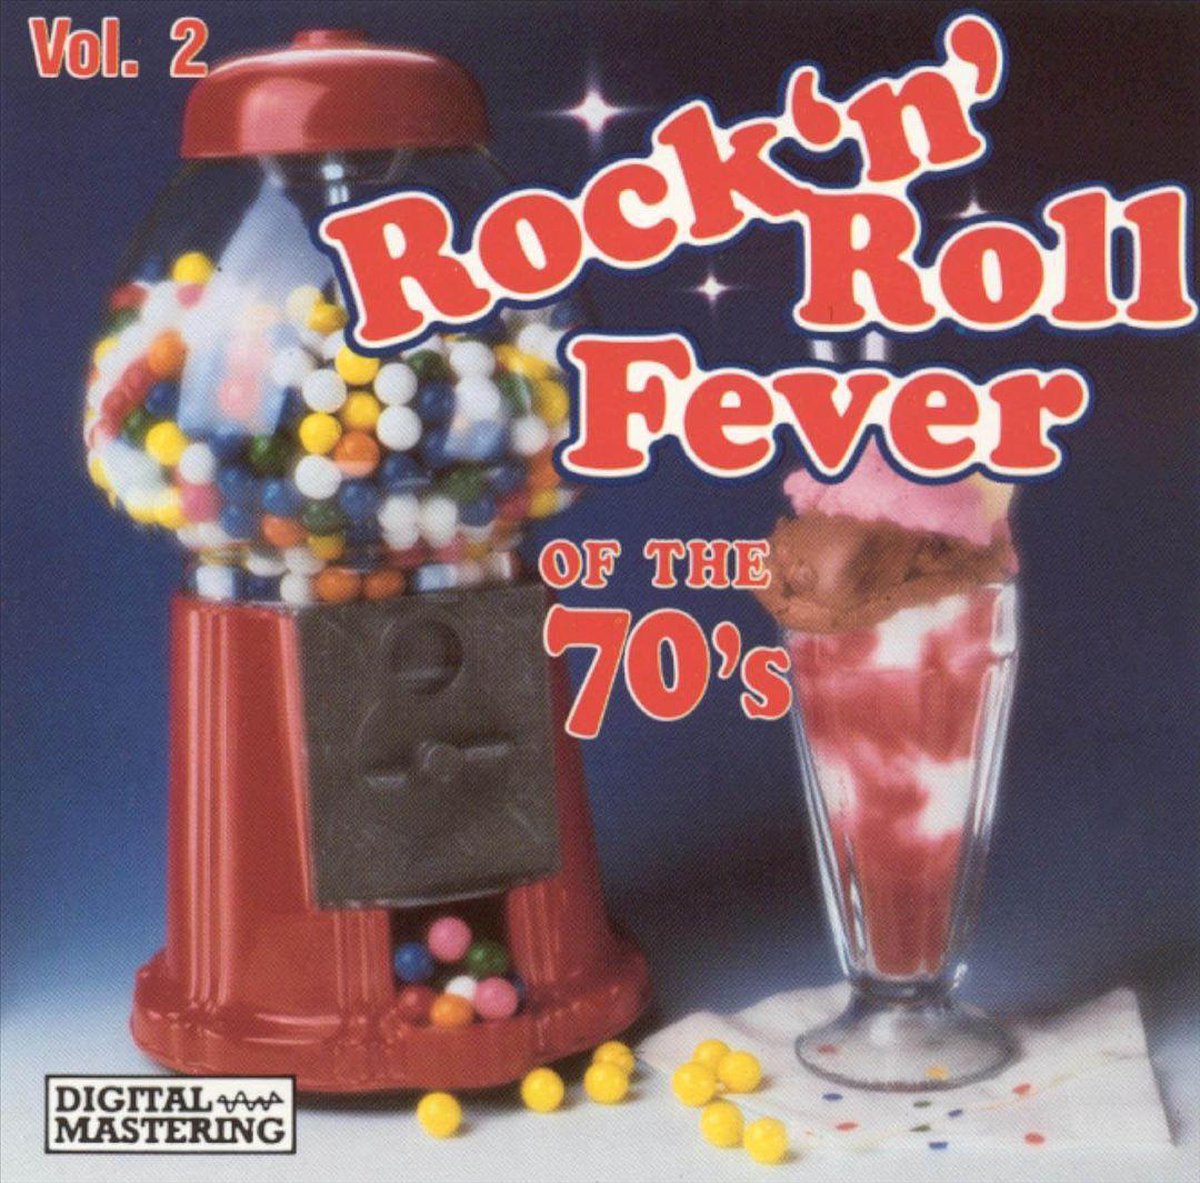 Rock 'N' Roll Fever of the Seventies, Vol. 2 - various artists